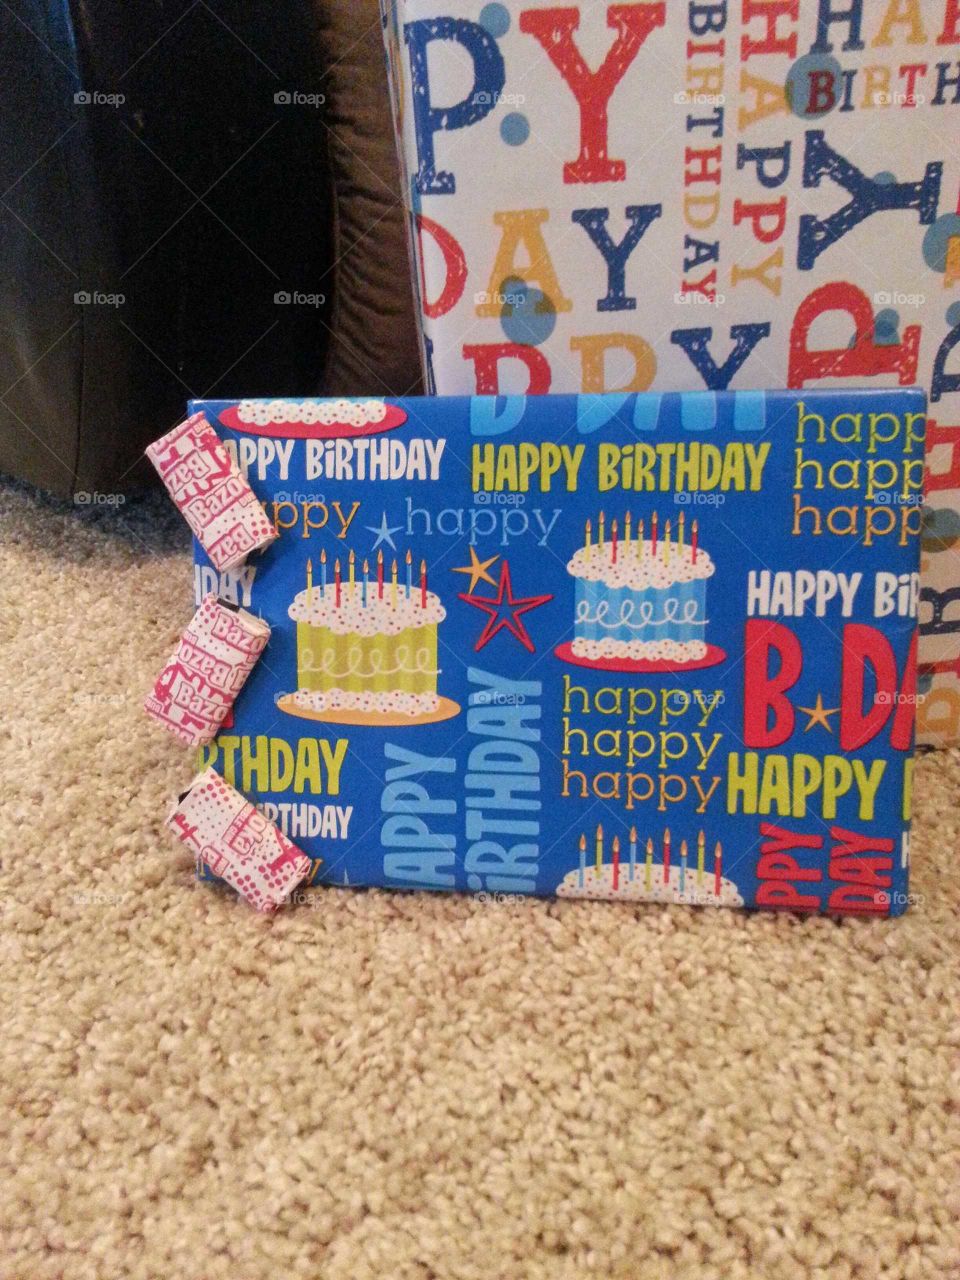 Birthday gifts wrapped & decorated